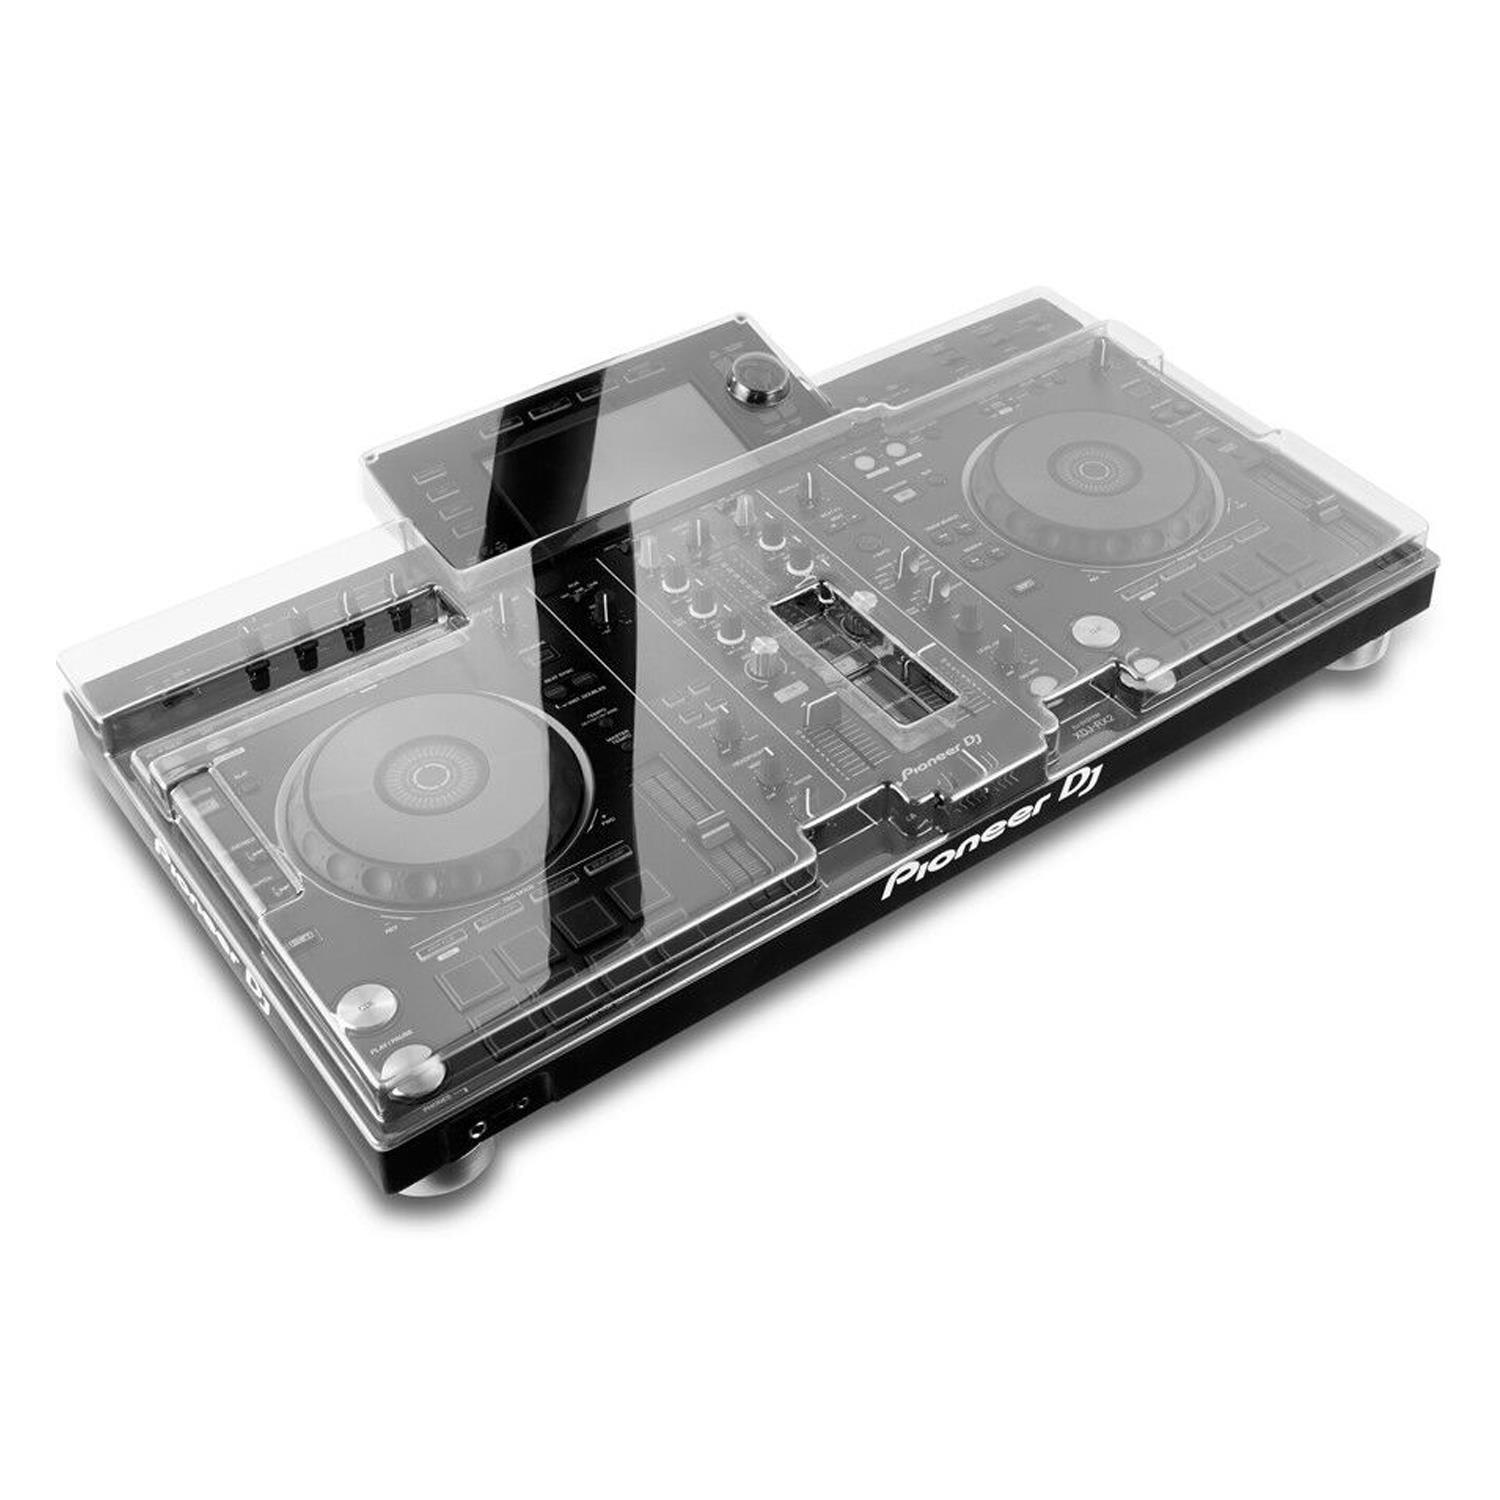 Decksaver Pioneer XDJ-RX2 Protective Dust Cover Lid Case - DY Pro Audio